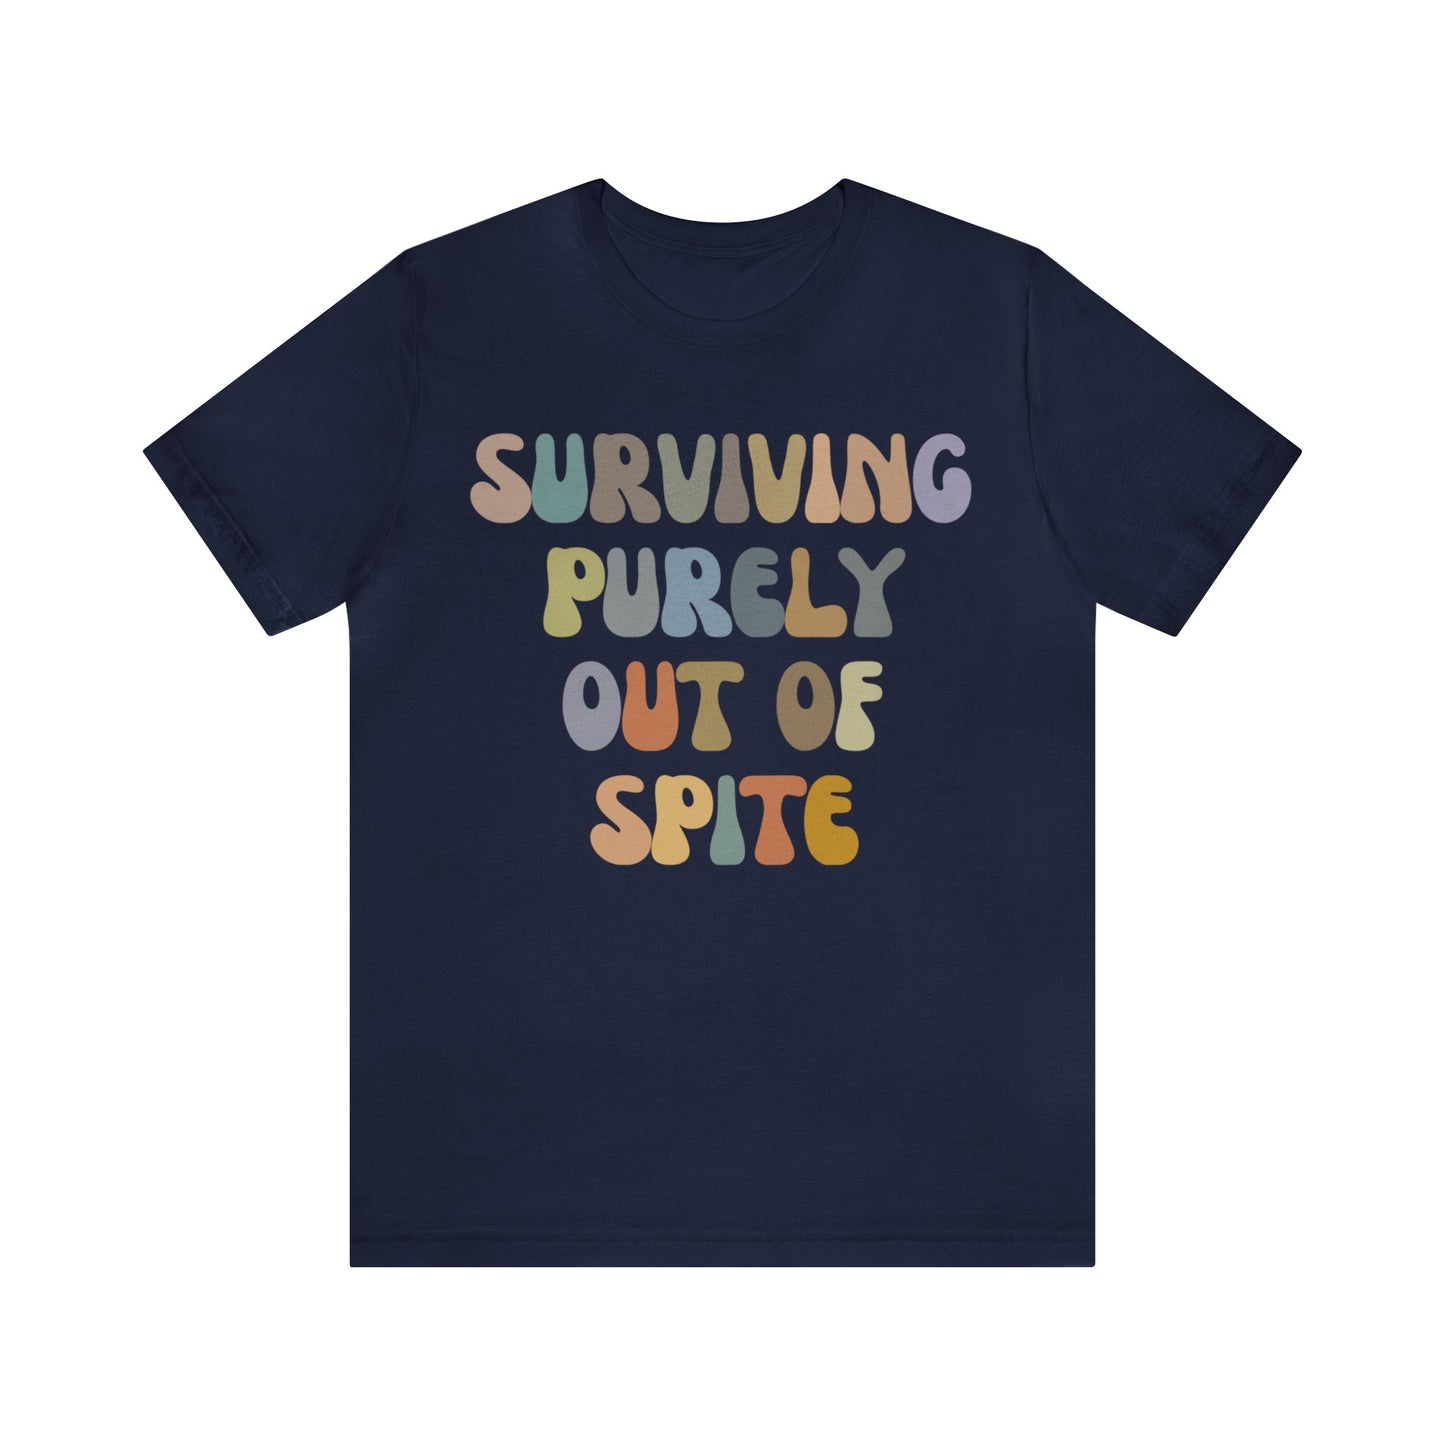 Surviving Purely Out of Spite Shirt, Mental Health, Strong Woman, Cancer Survivor, Survivor Shirt, Strong Empowered Women, Iron Lady, T1406